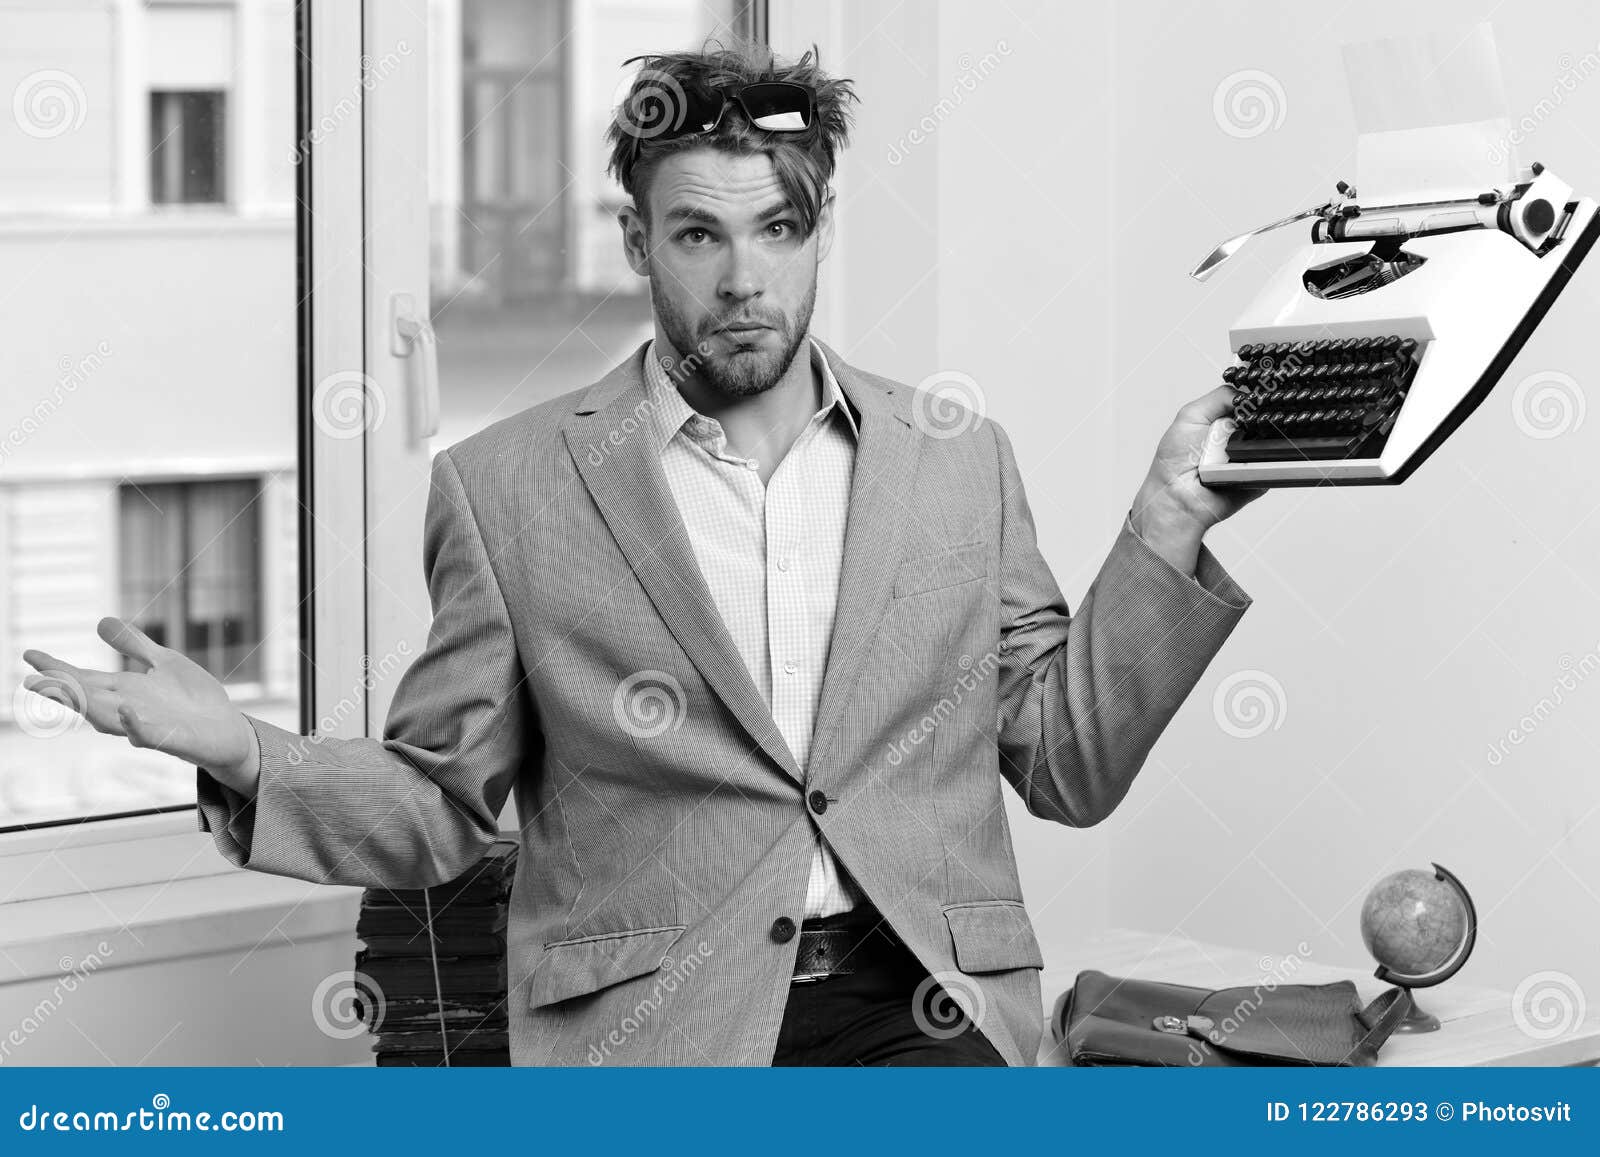 Man with Puzzled Face Types Business Report. Young Author or Editor Holds  Old Typewriter on Window Background Stock Image - Image of editing,  puzzled: 122786293